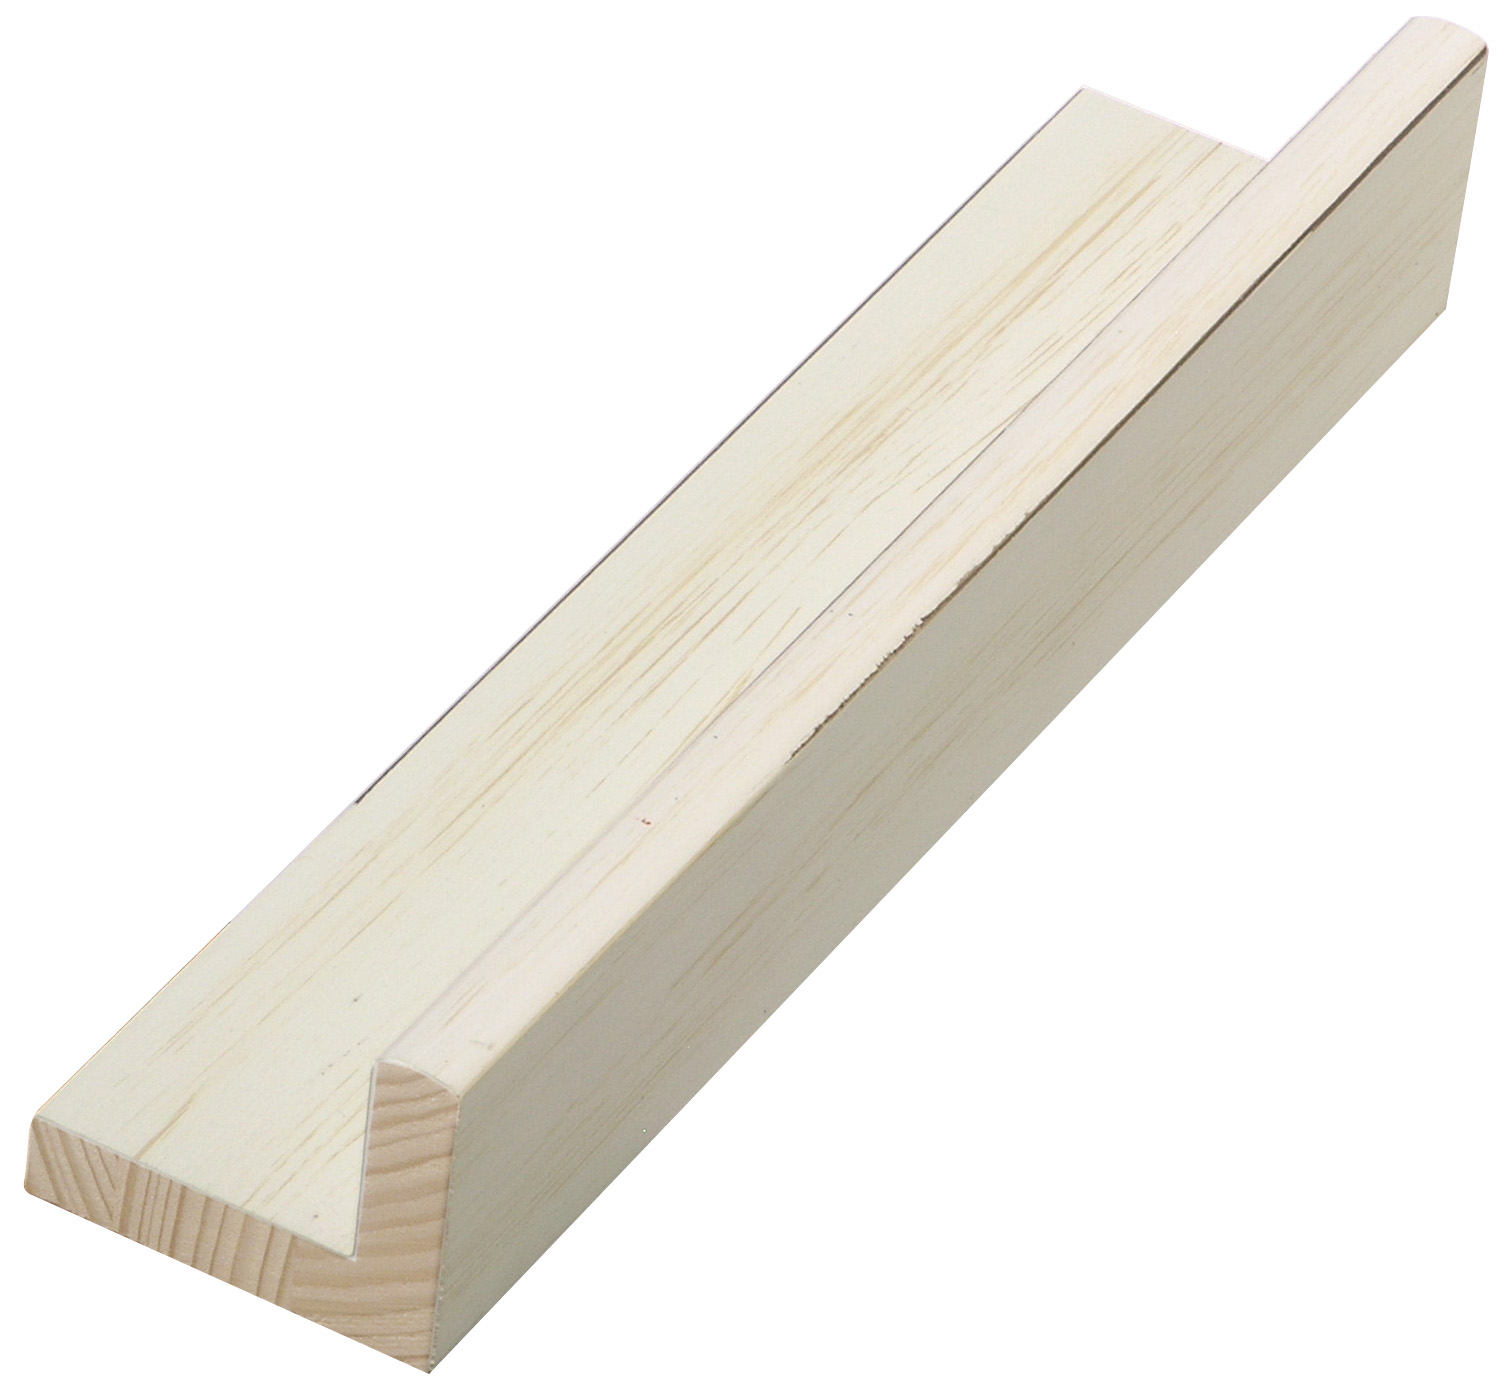 Moulding finger-jointed pine L shape, Larg.mm44 Height 34 Cream - 593CREMA